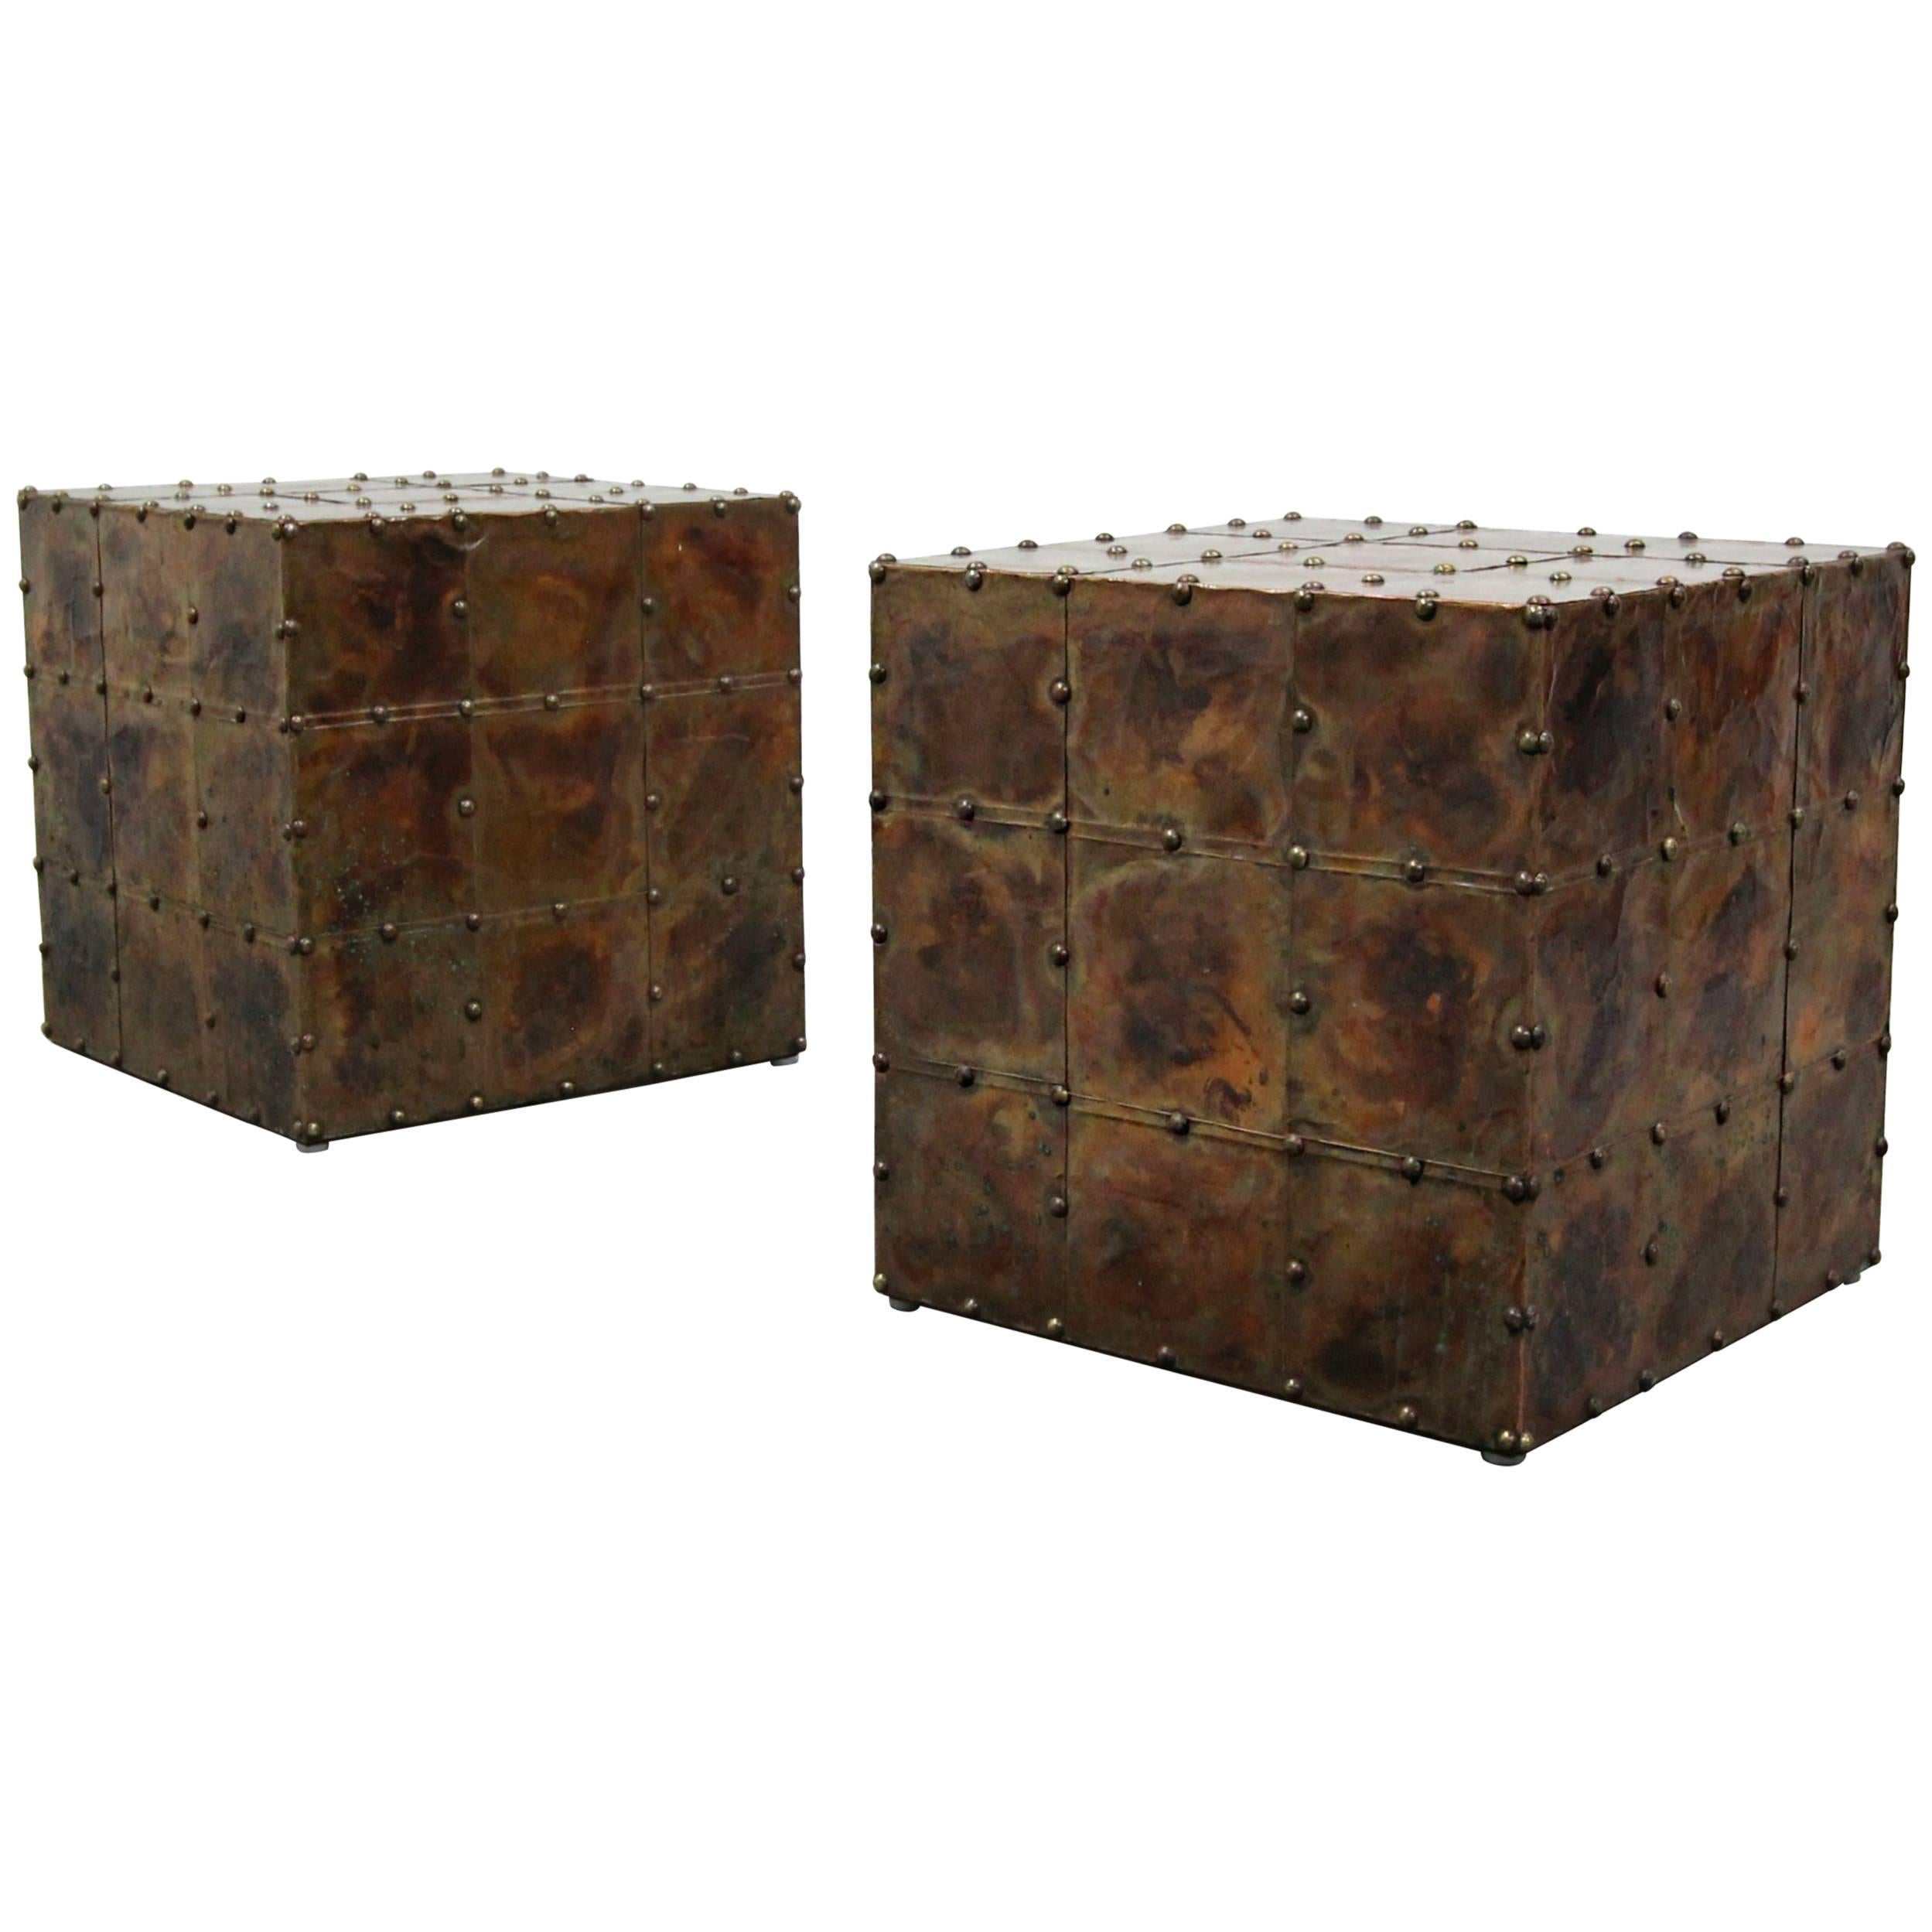 Pair of Patinaed Copper Cube Side Tables Made in Spain by Sarreid